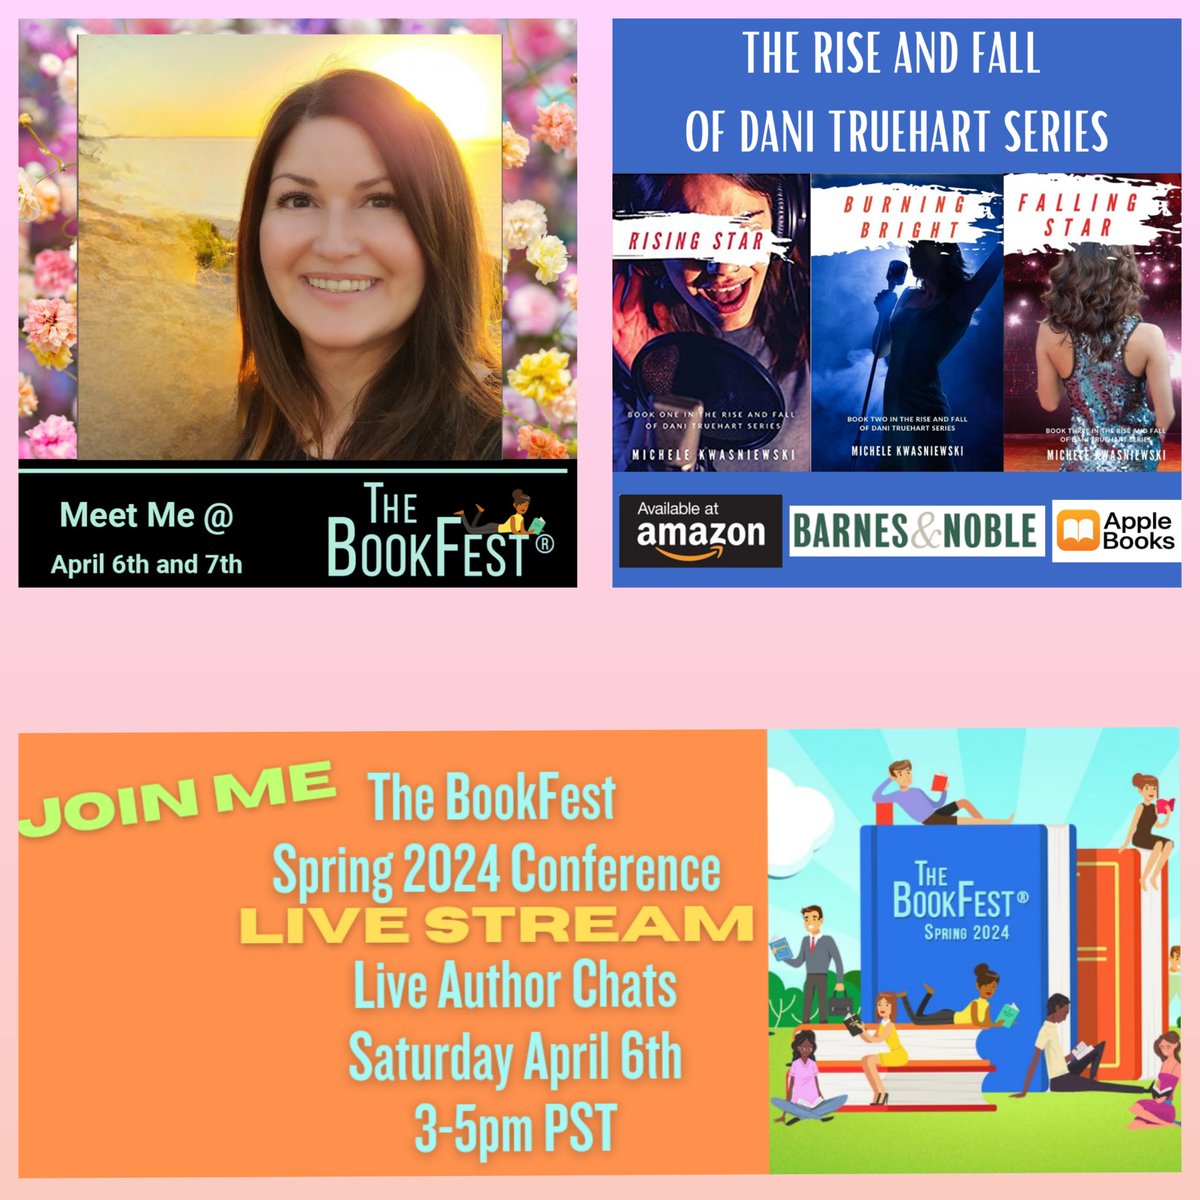 #BookFest2024 starts streaming at 10:30am PST. Tune in TODAY for THE #LIVE AUTHOR CHATS from 3-5pm PST to catch my chat! Watch here: thebookfest.com @Desiree_Duffy @RandSmithBooks @DaisyCatNine #bookfest #SaturdayVibes #books #authors #streaming